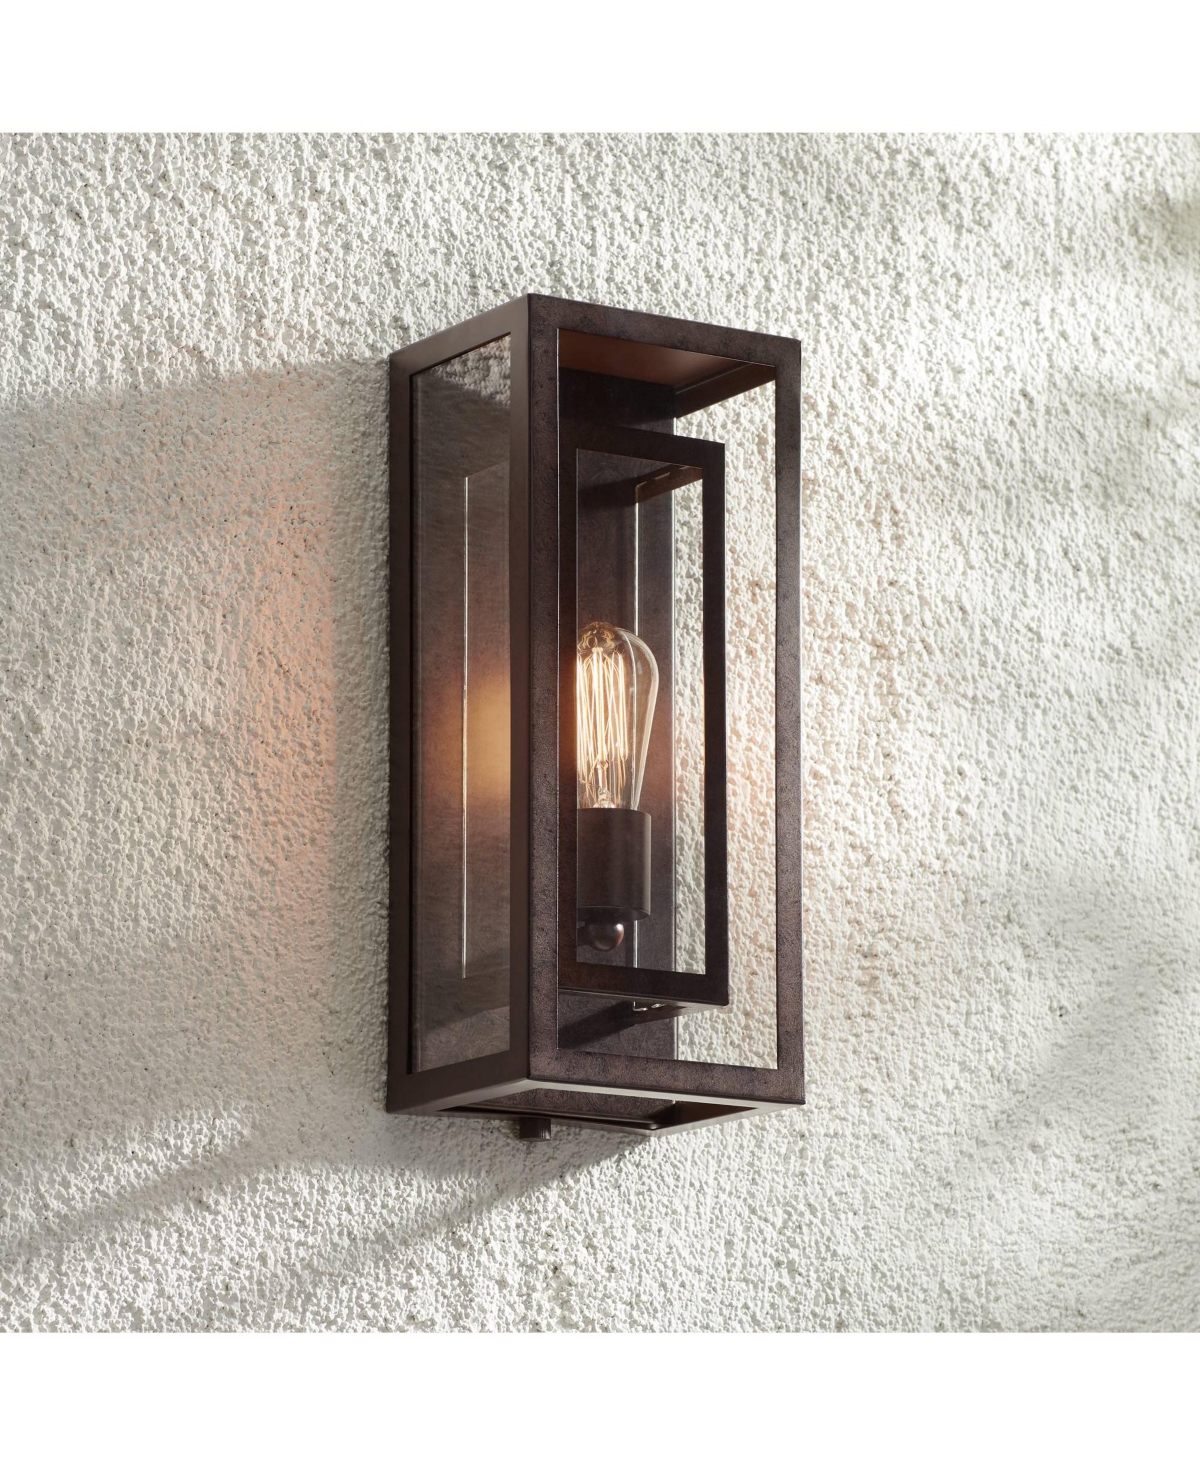 Double Box Modern Industrial Farmhouse Rustic Outdoor Wall Light Fixture Bronze 15 1/2" Clear Glass for Exterior Barn Deck House Porch Yard Patio Outs